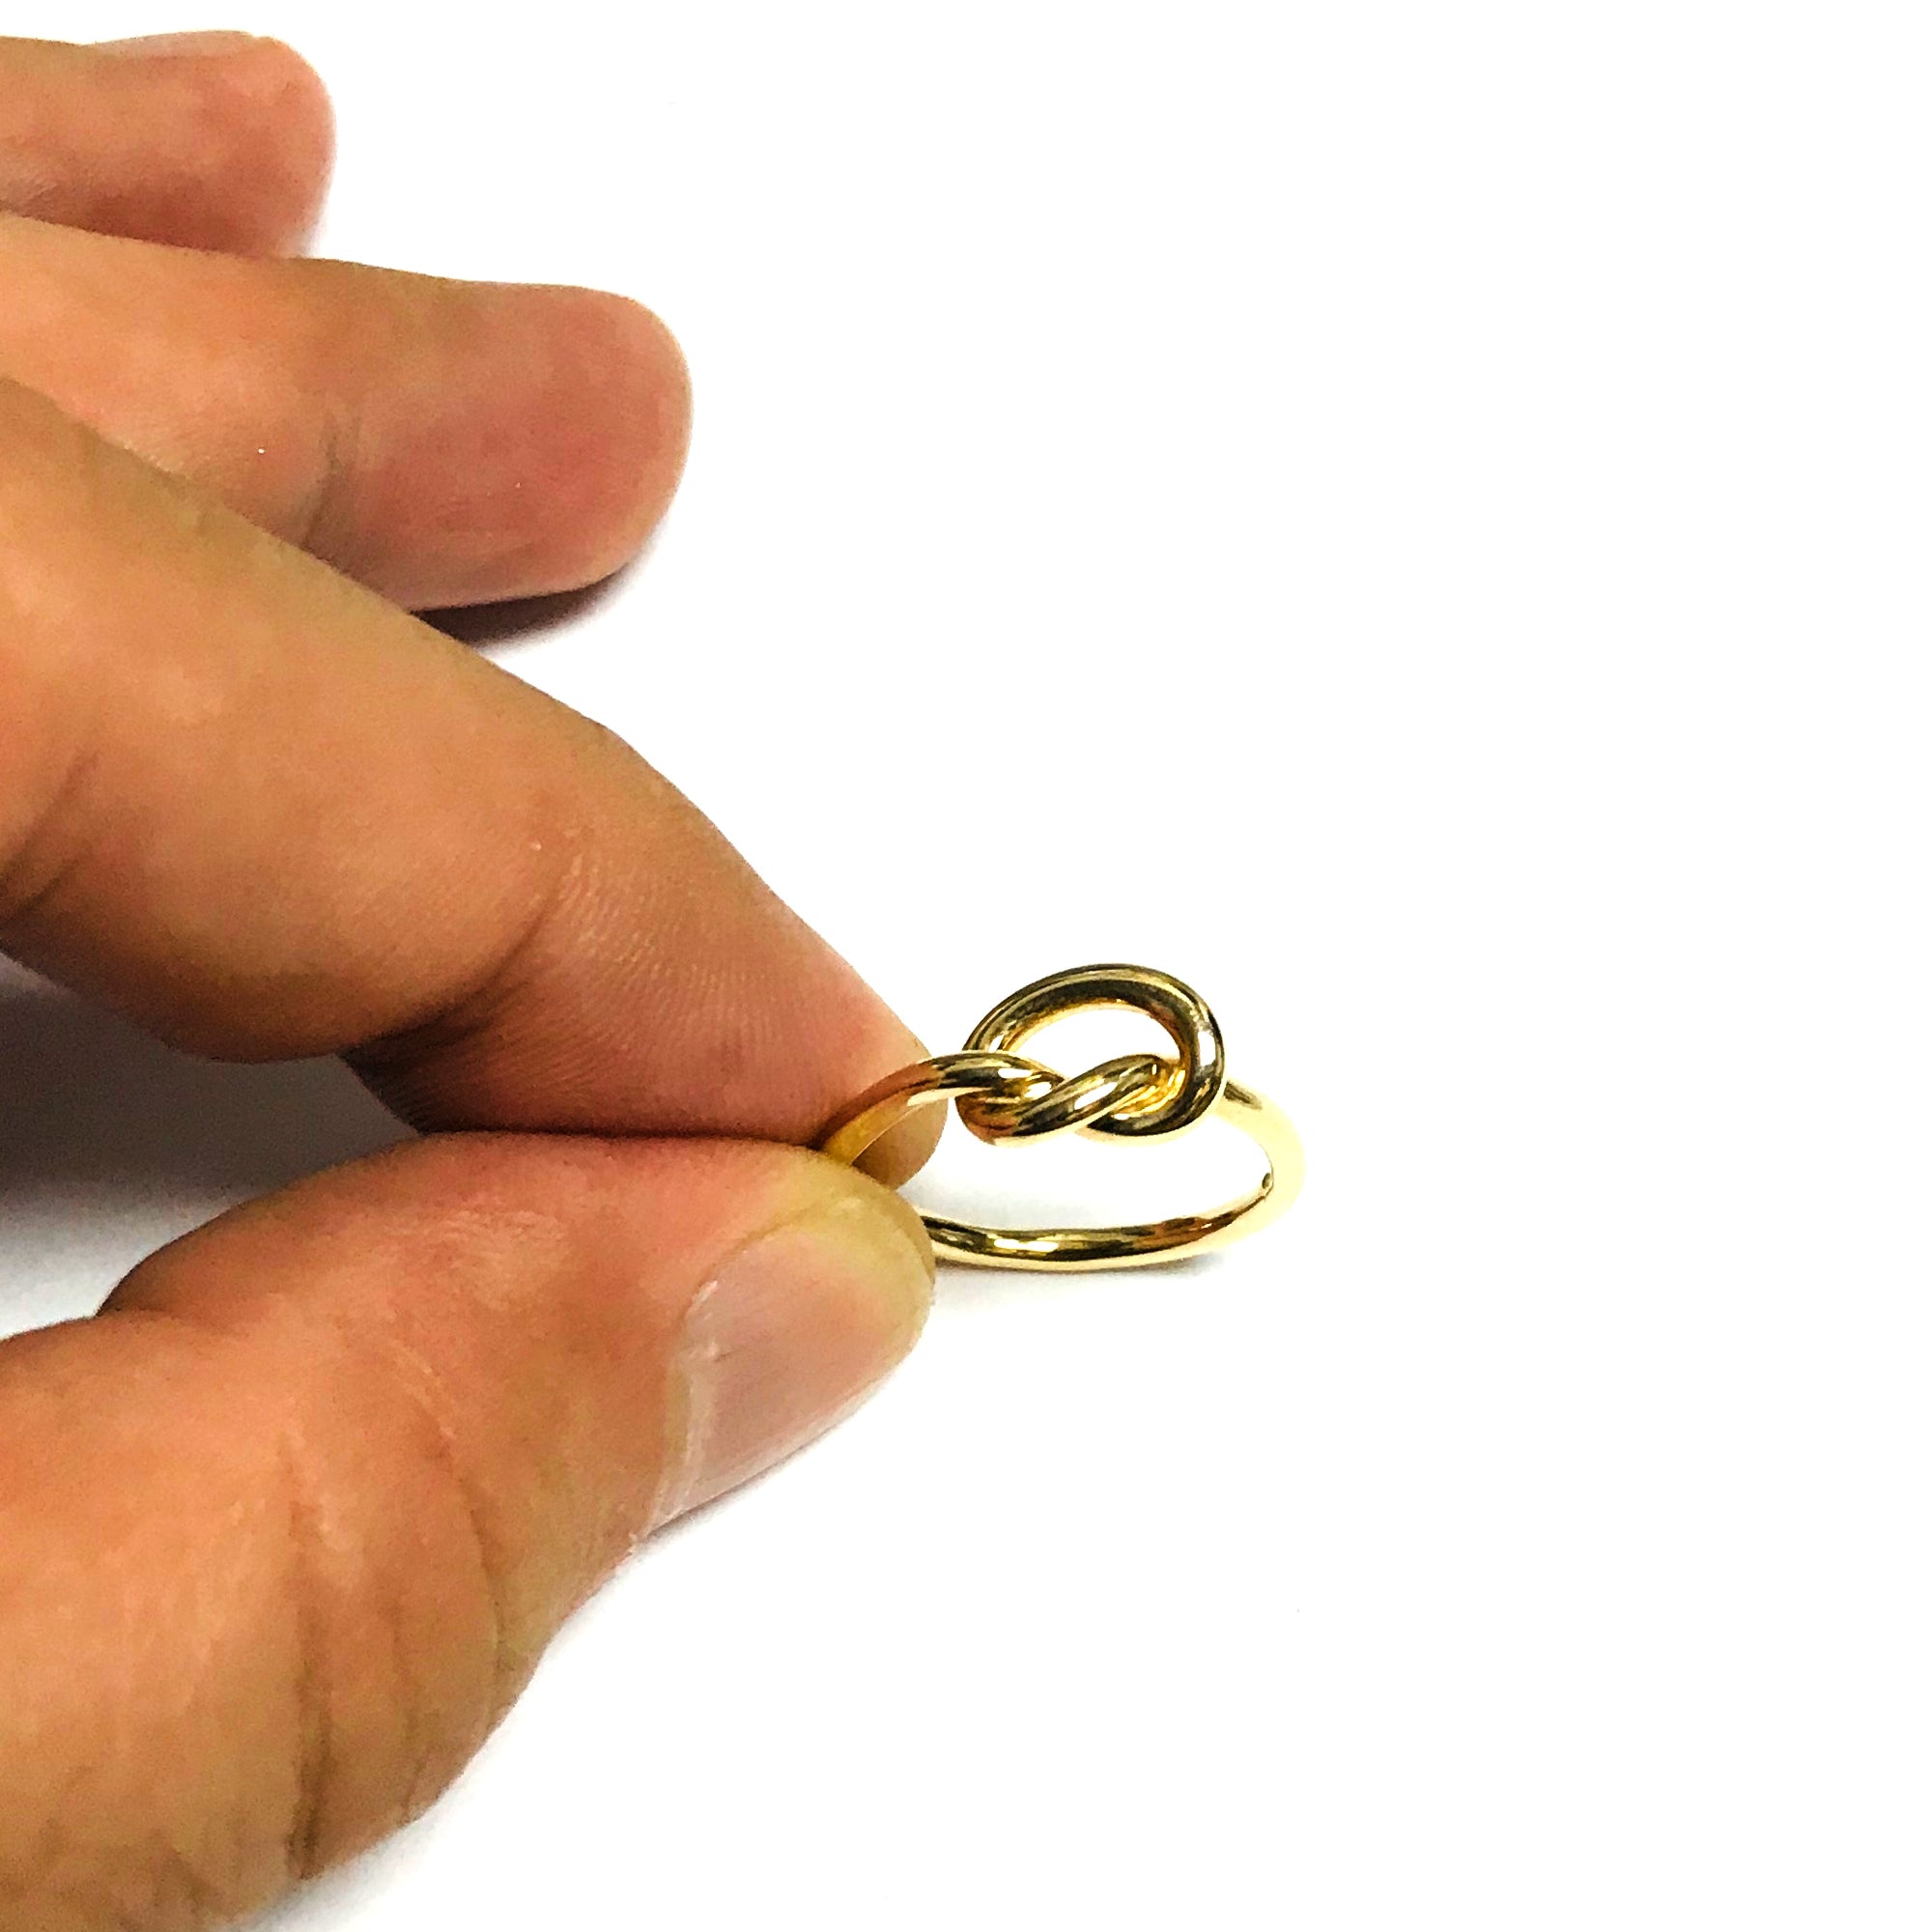 14K Yellow Gold Lovers Love Knot Pretzel Ring, Size 7 fine designer jewelry for men and women